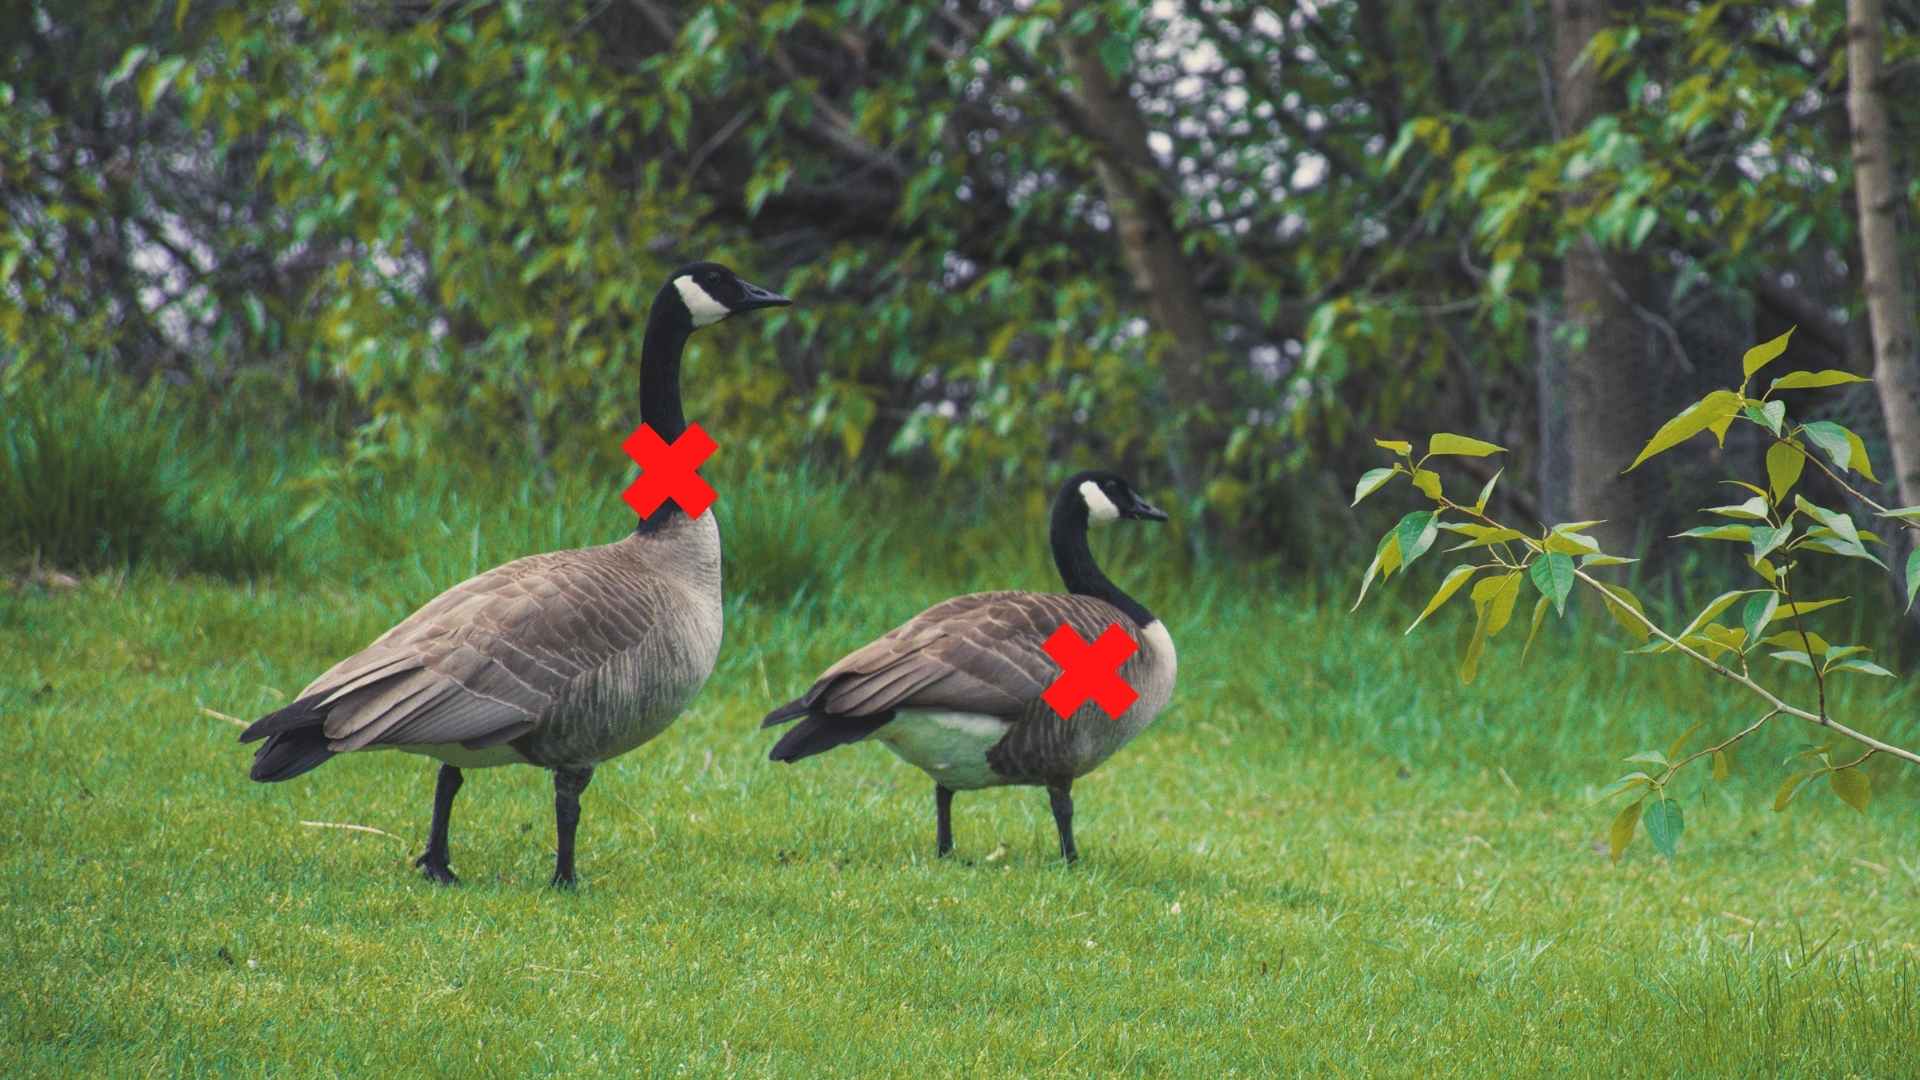 geese-lower-neck-and-body-